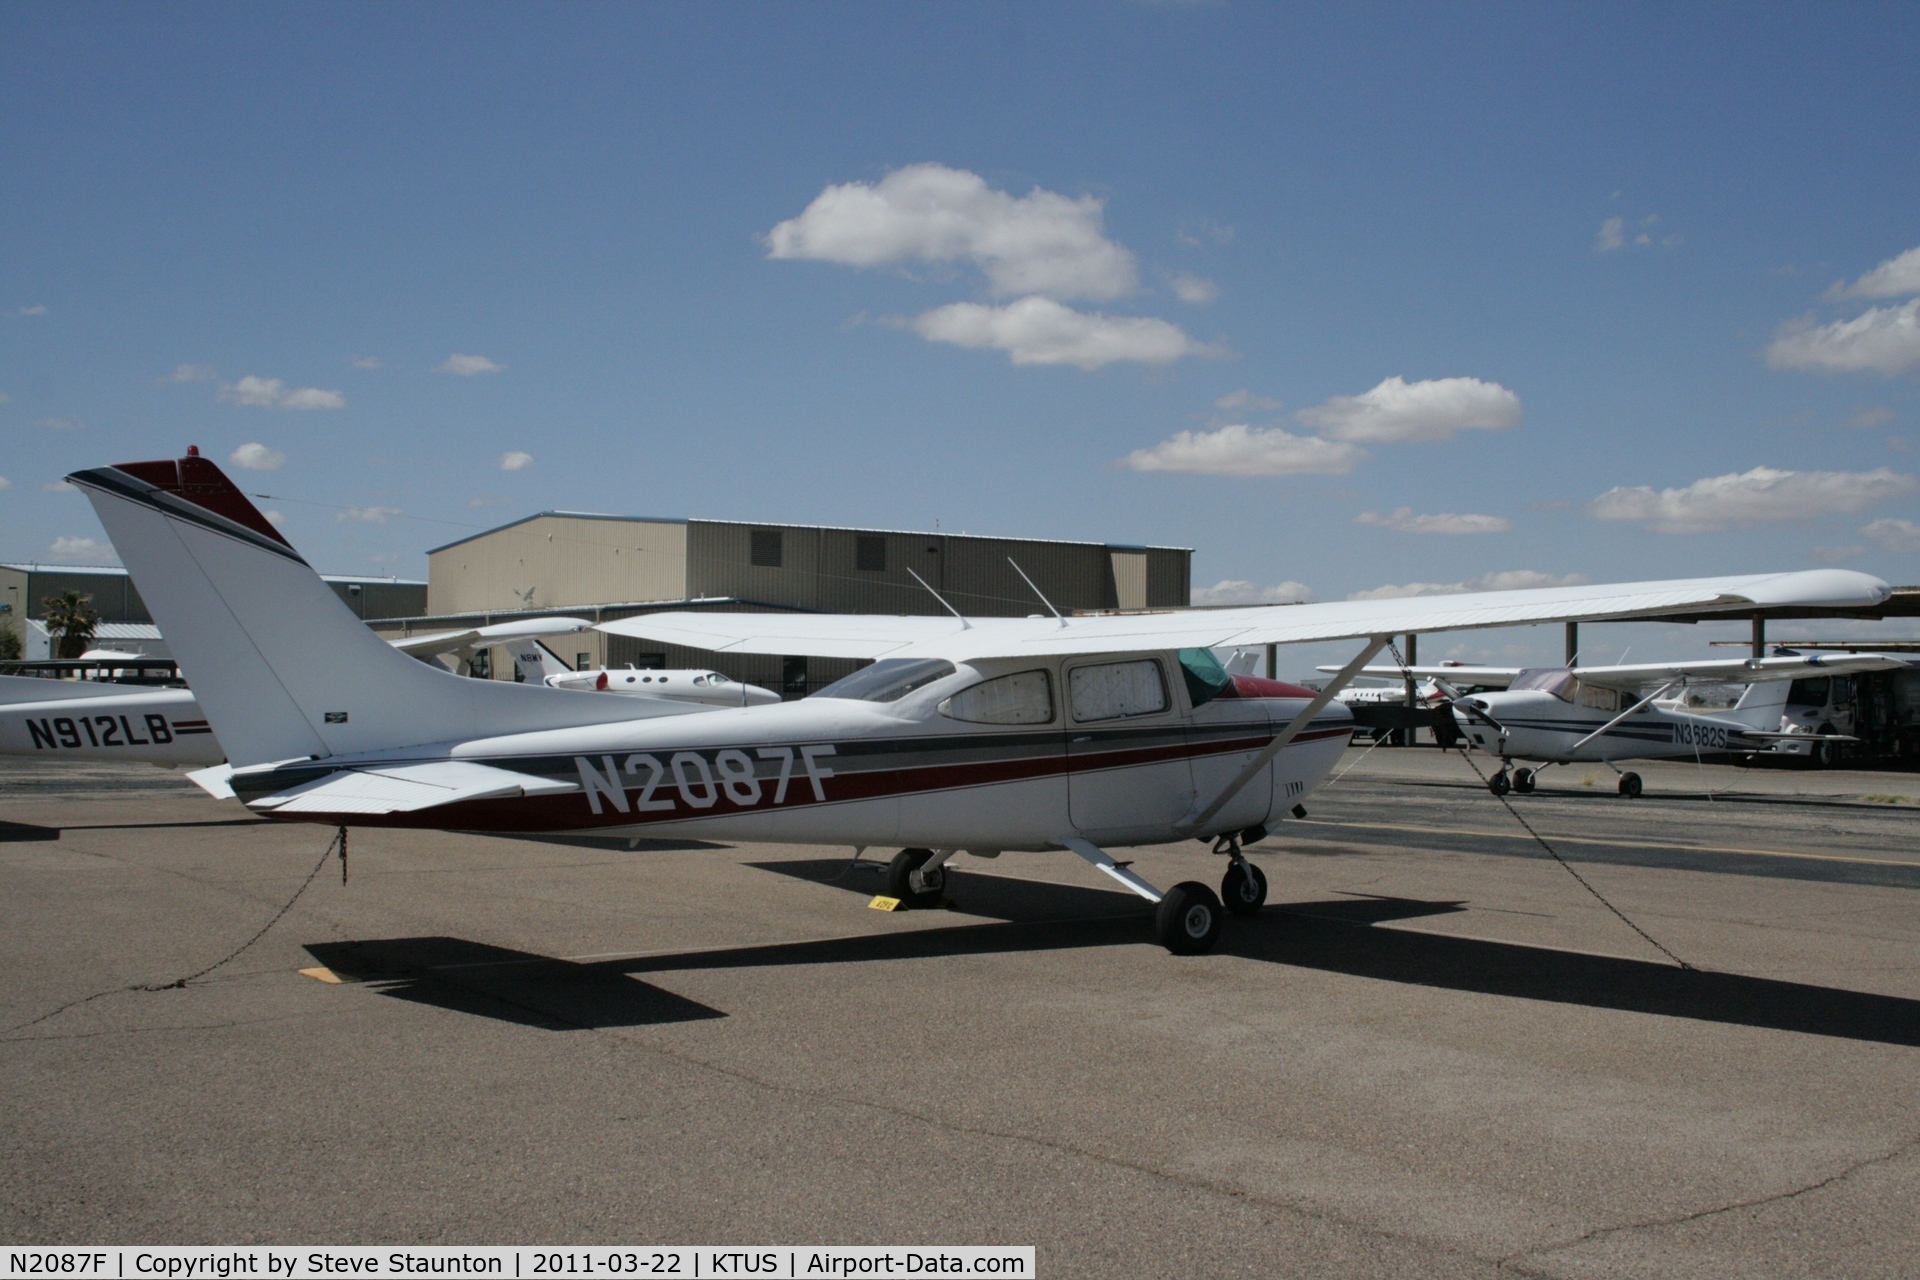 N2087F, Cessna 182P Skylane C/N 18264886, Taken at Tucson International Airport, in March 2011 whilst on an Aeroprint Aviation tour